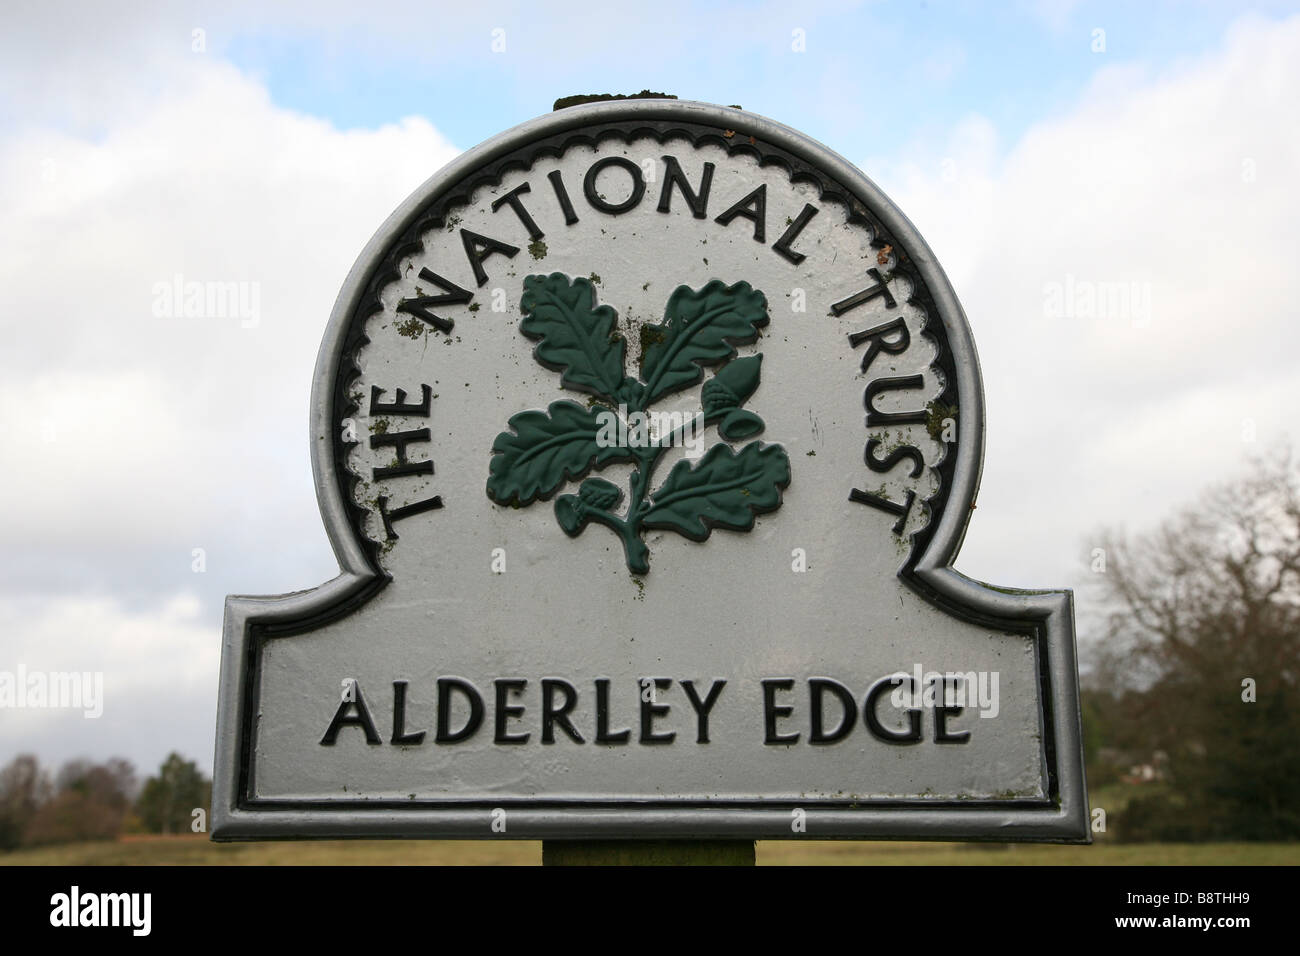 The National Trust sign showing Alderley Edge, Cheshire Stock Photo